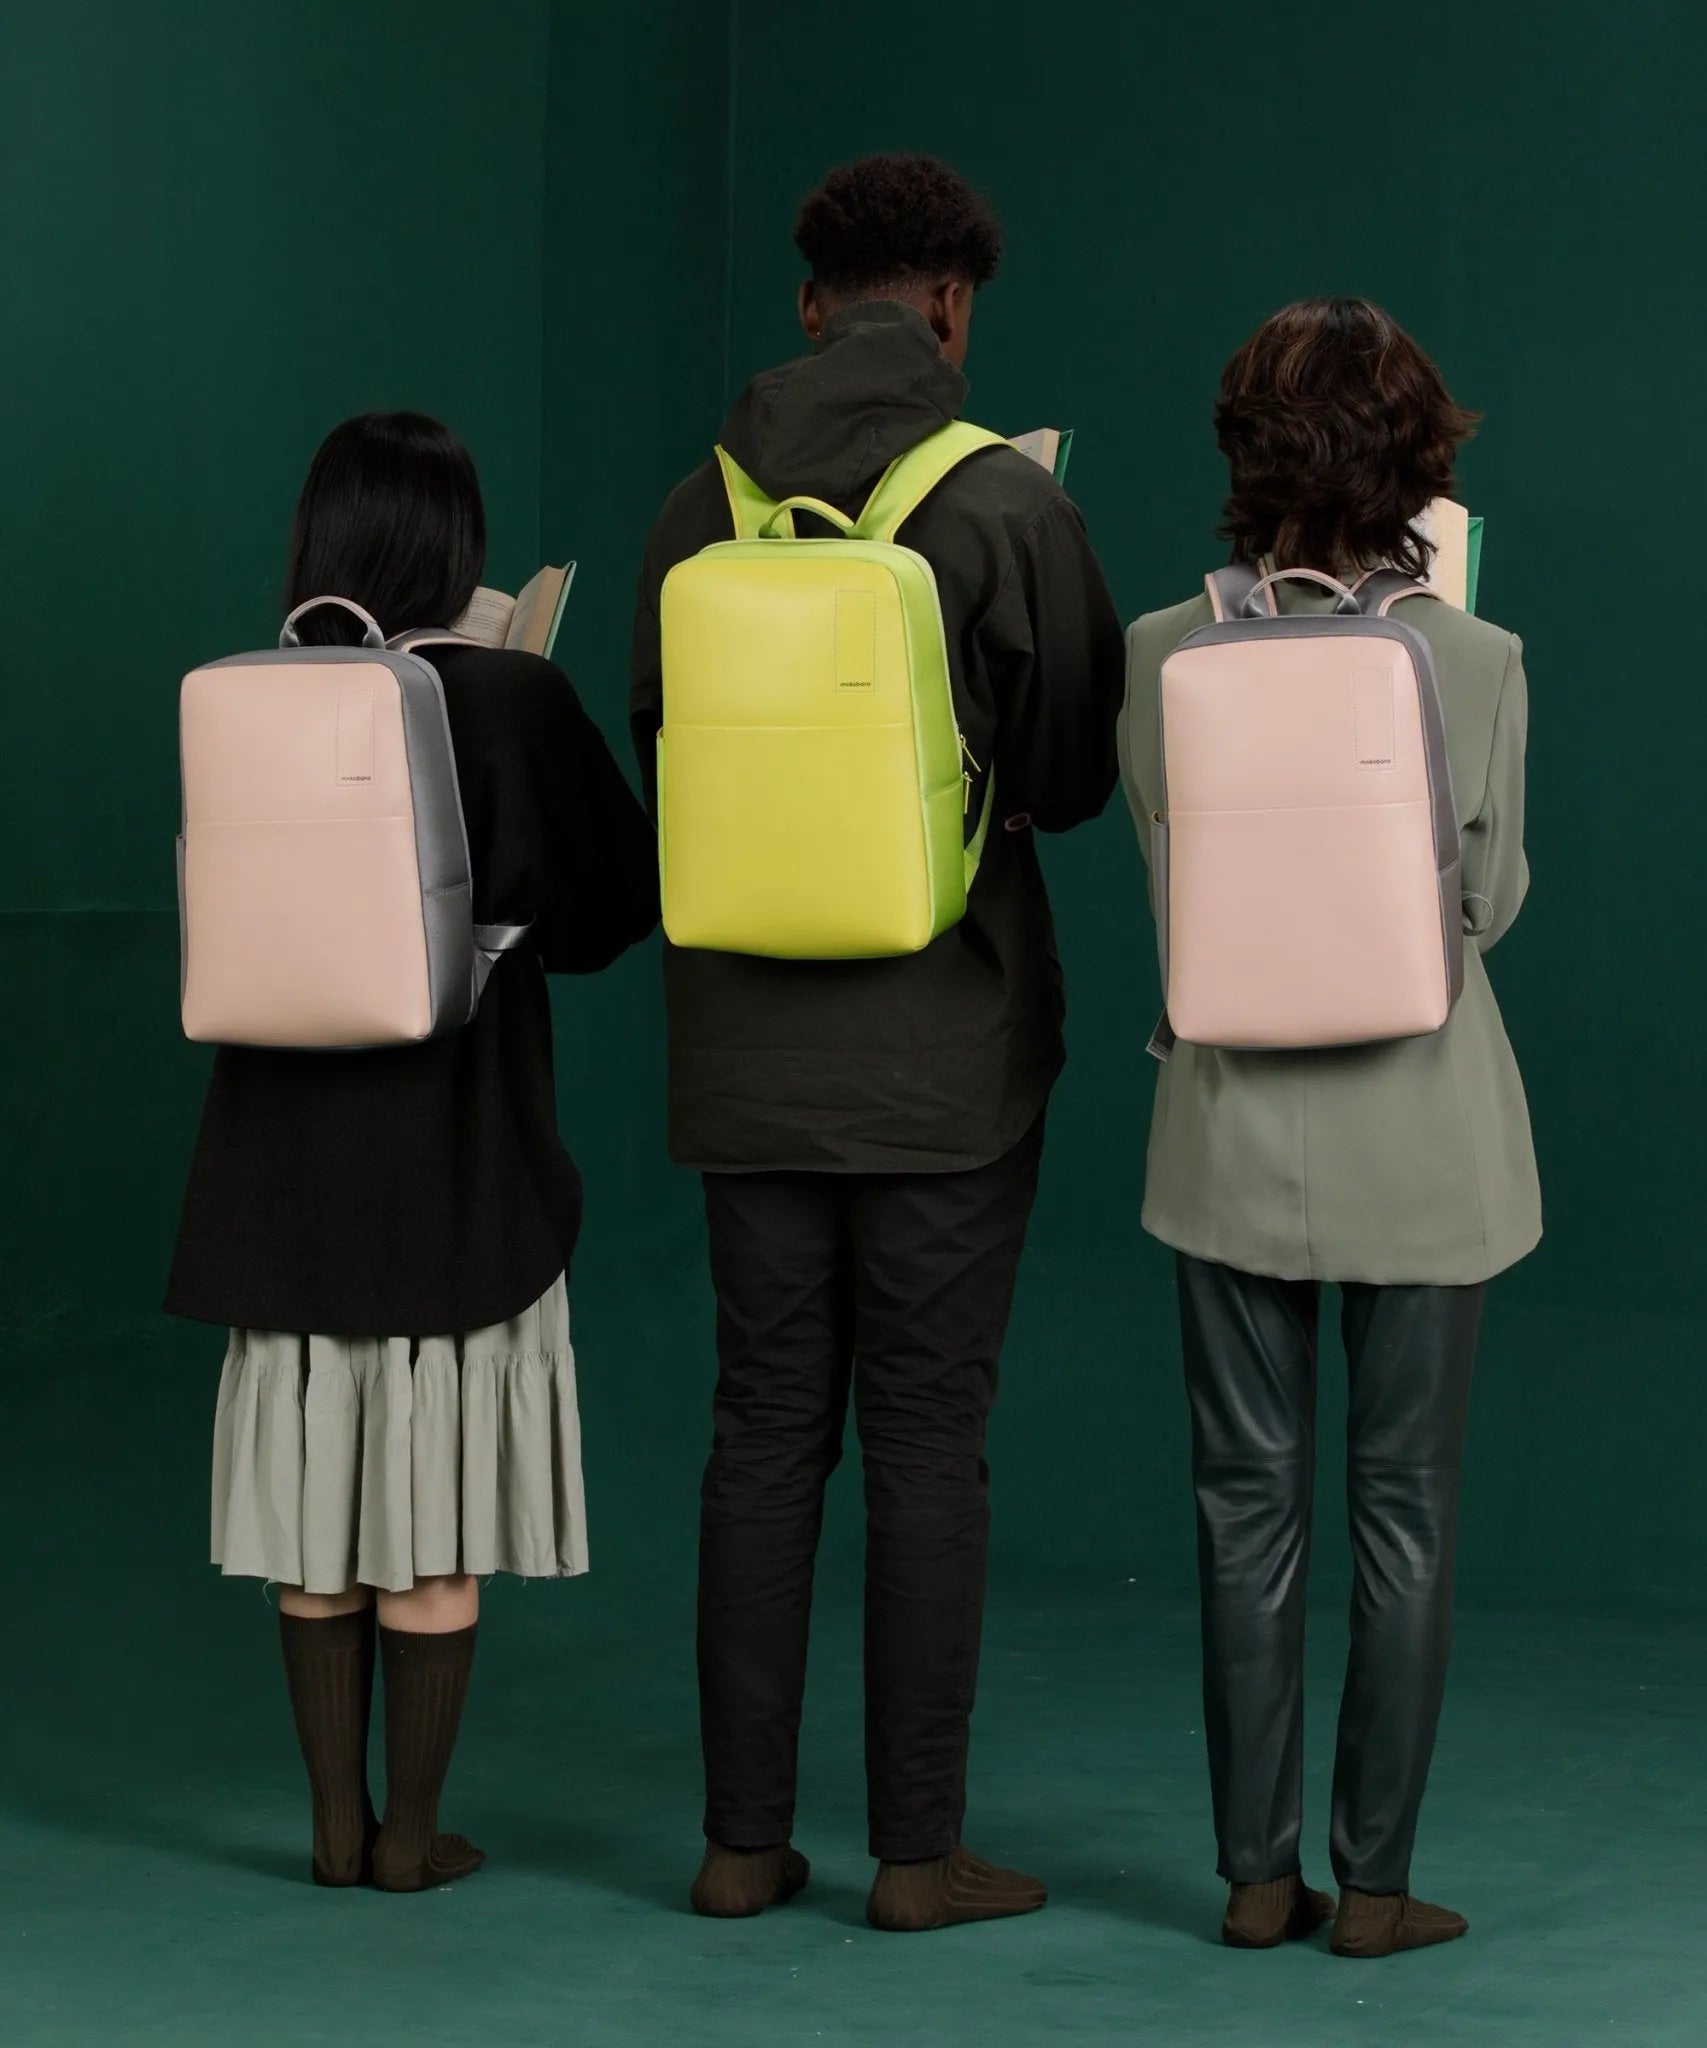 Color_Modern Love | The Backpack